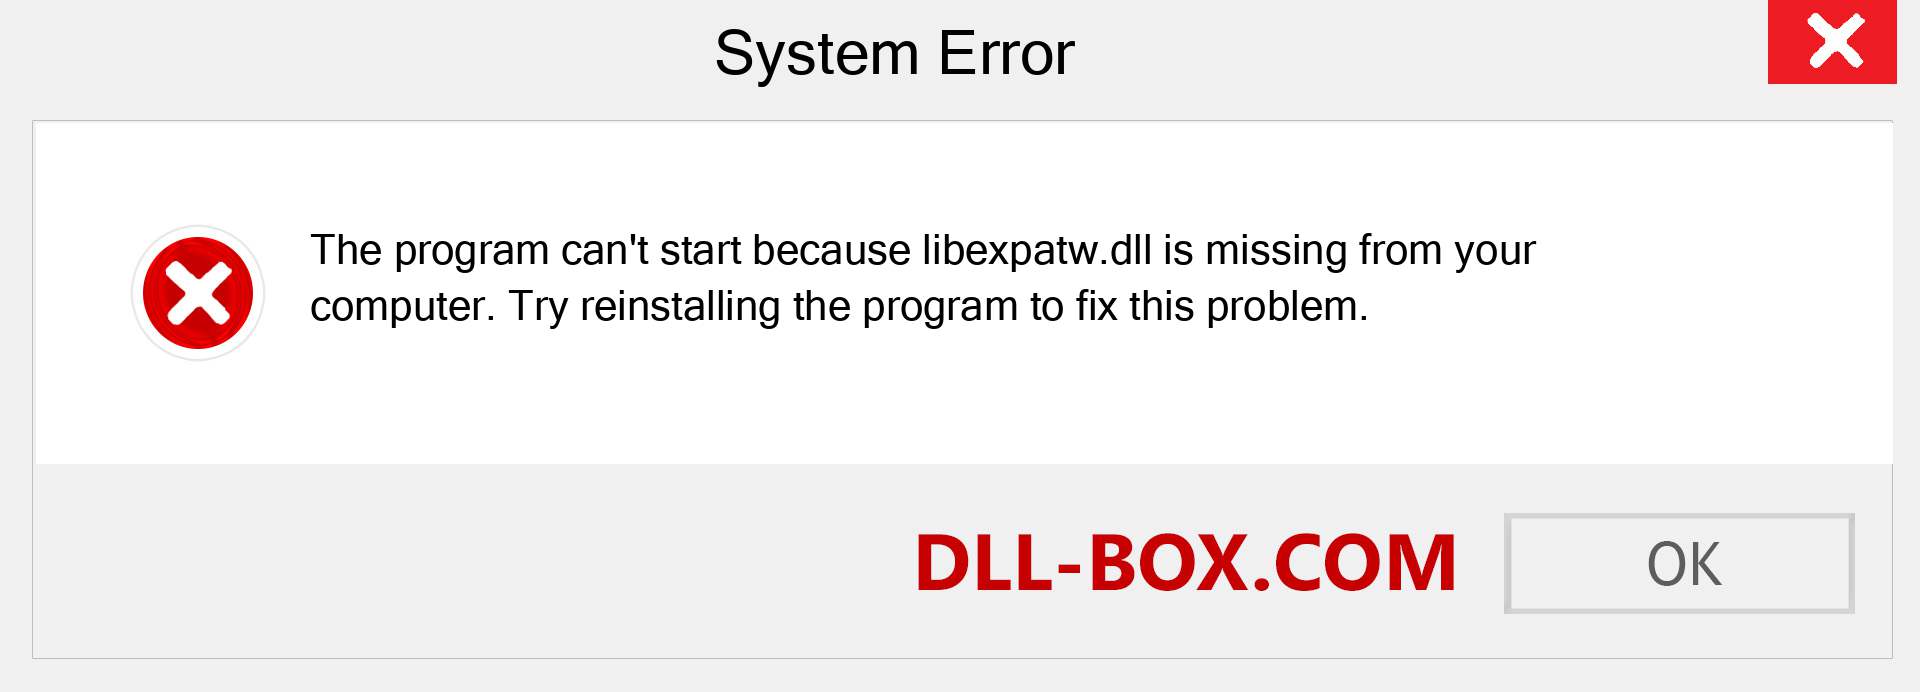  libexpatw.dll file is missing?. Download for Windows 7, 8, 10 - Fix  libexpatw dll Missing Error on Windows, photos, images